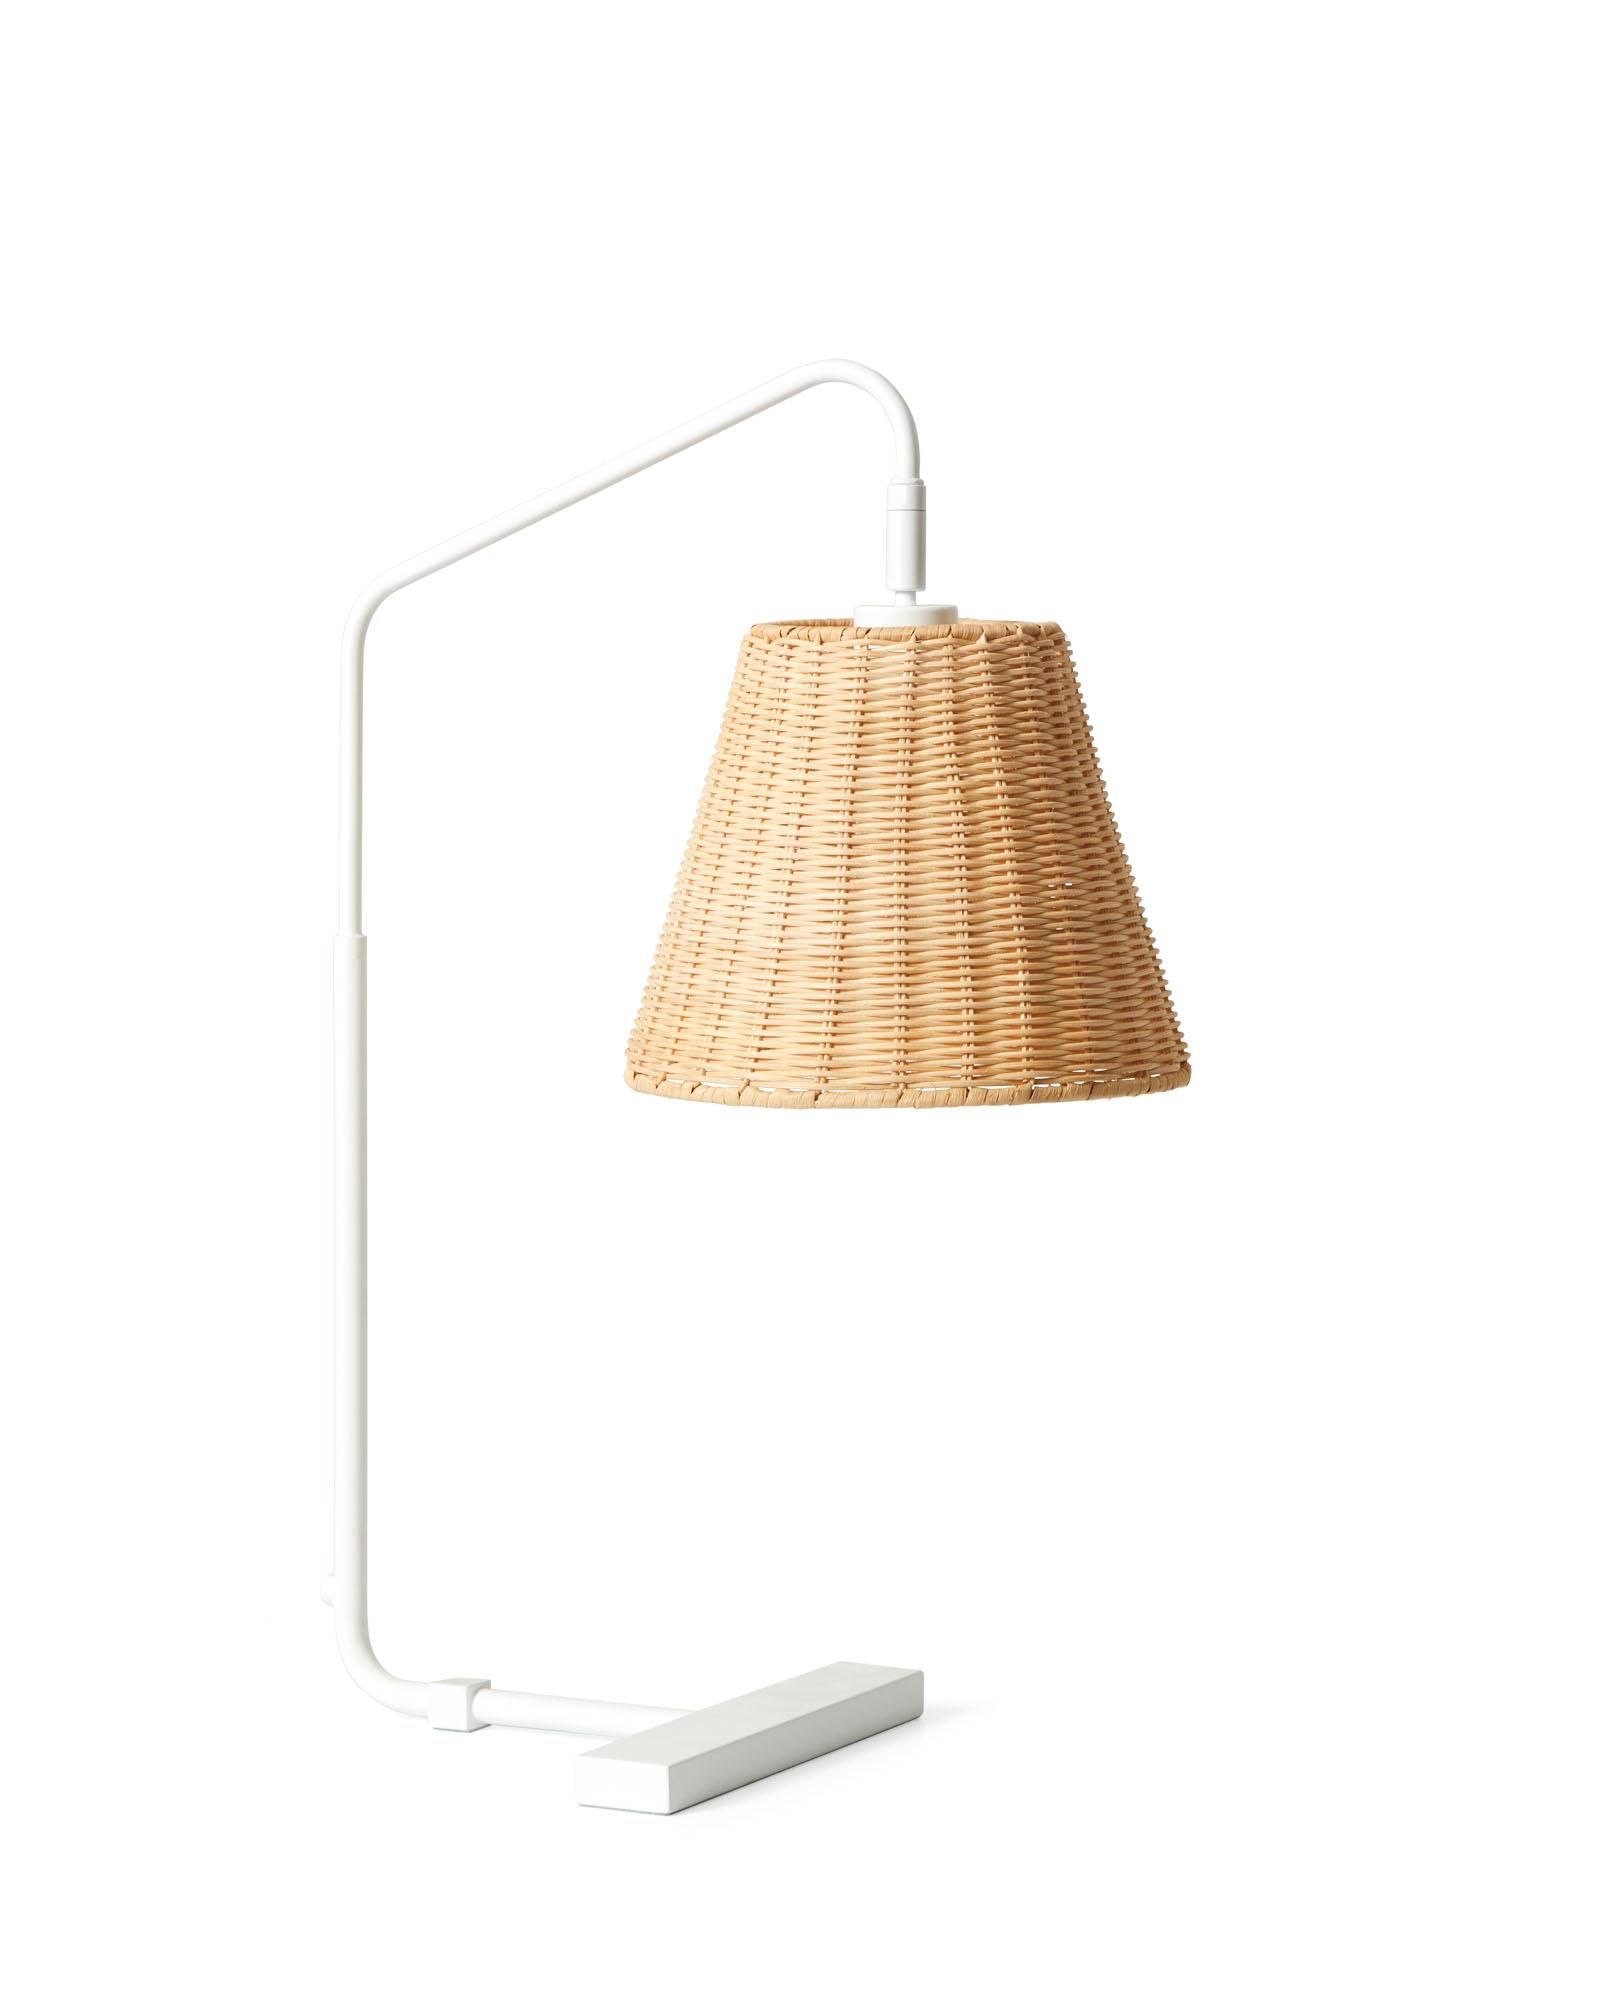 Flynn Petite Lamp | Serena and Lily